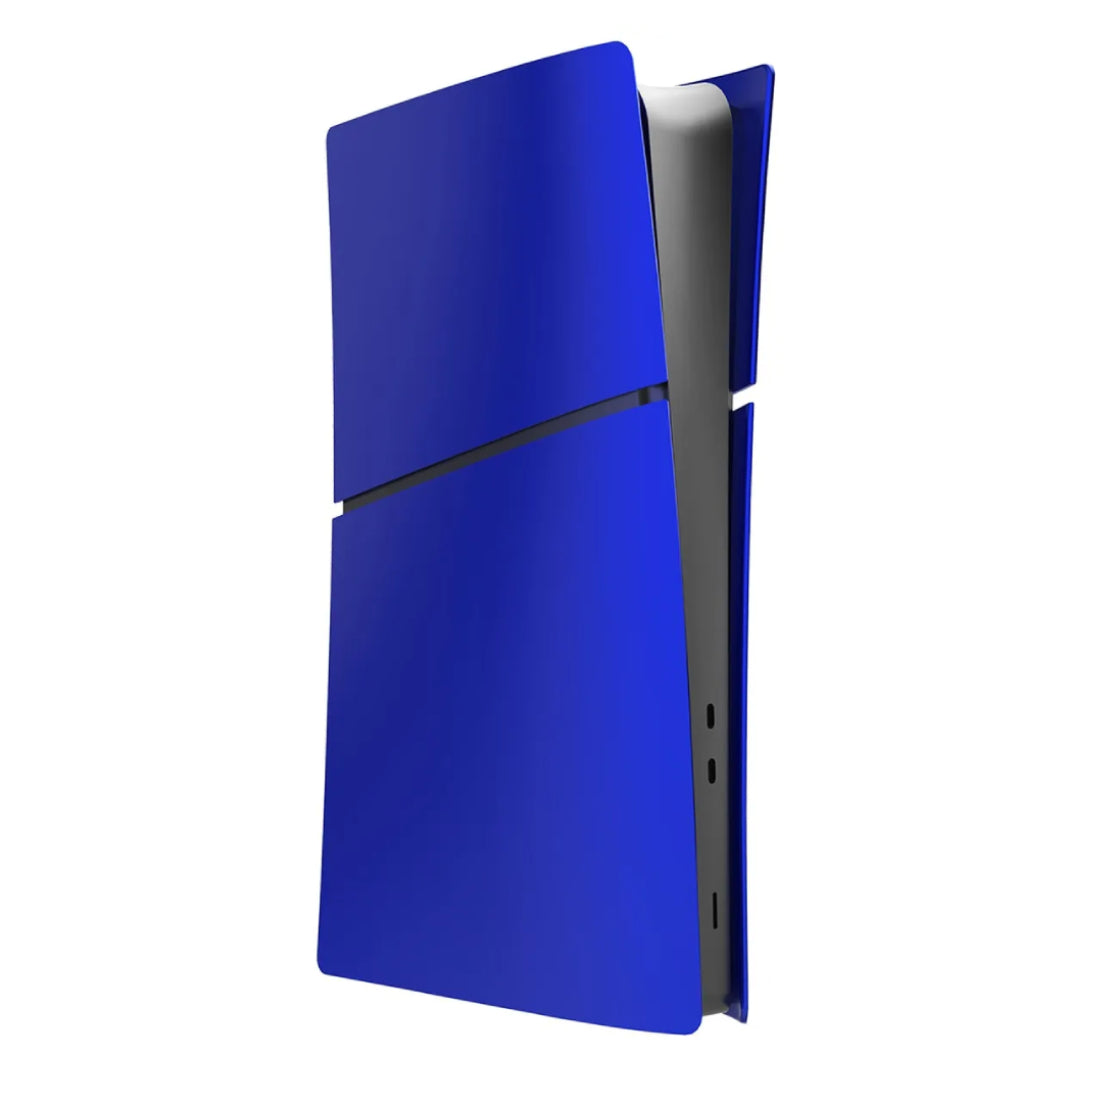 Faceplate Slim Plastic Cover For Playstation 5 - Digital Edition - Blue